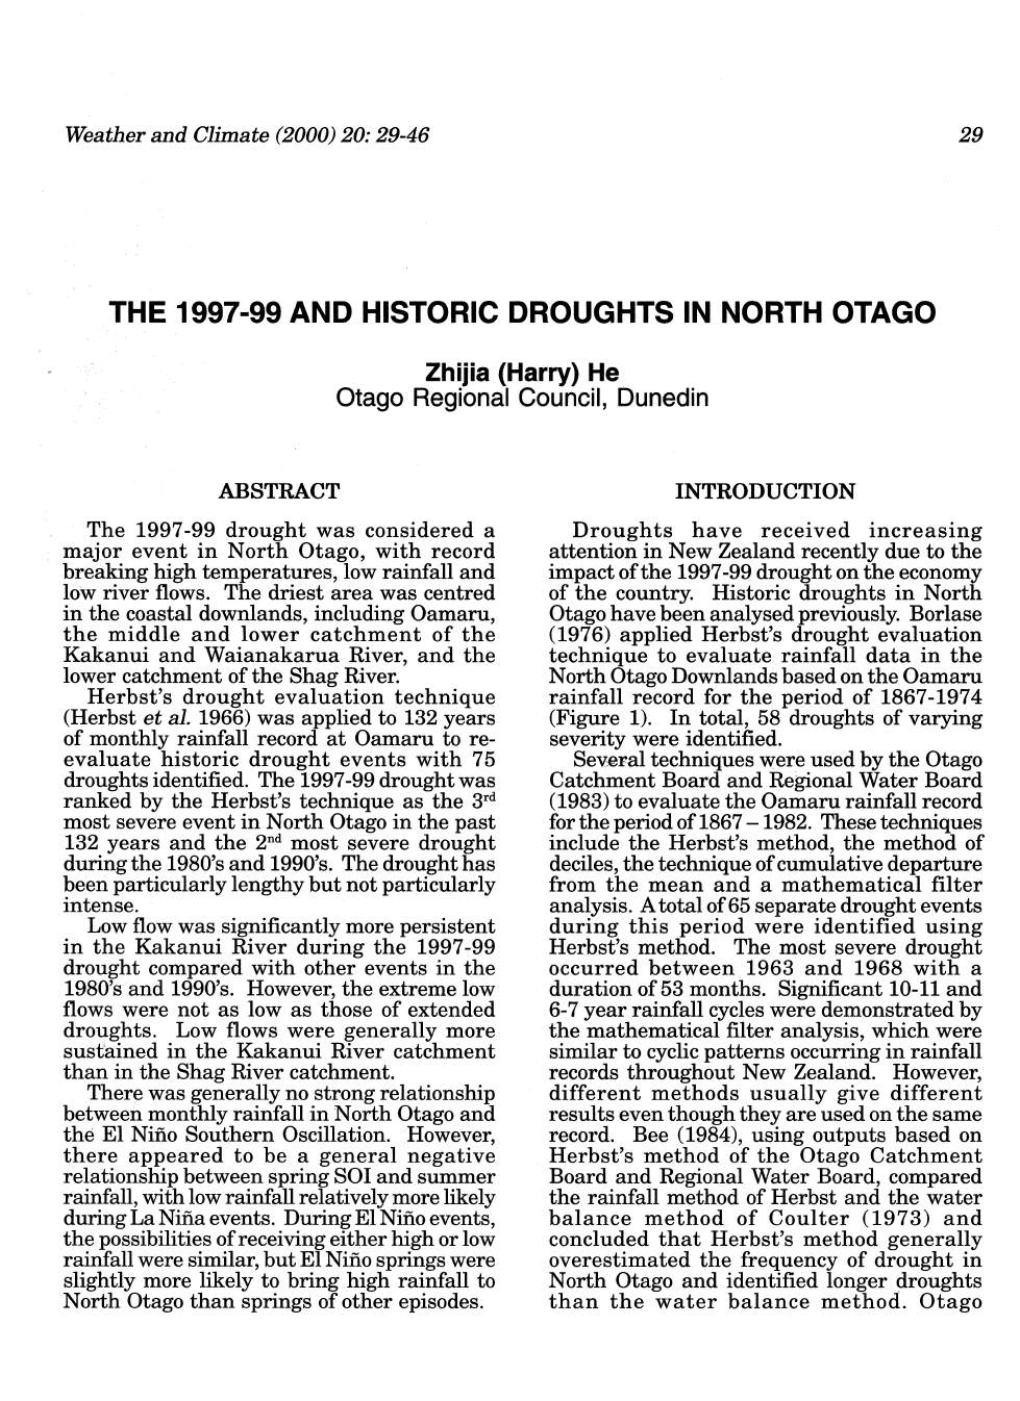 The 1997-99 and Historic Droughts in North Otago